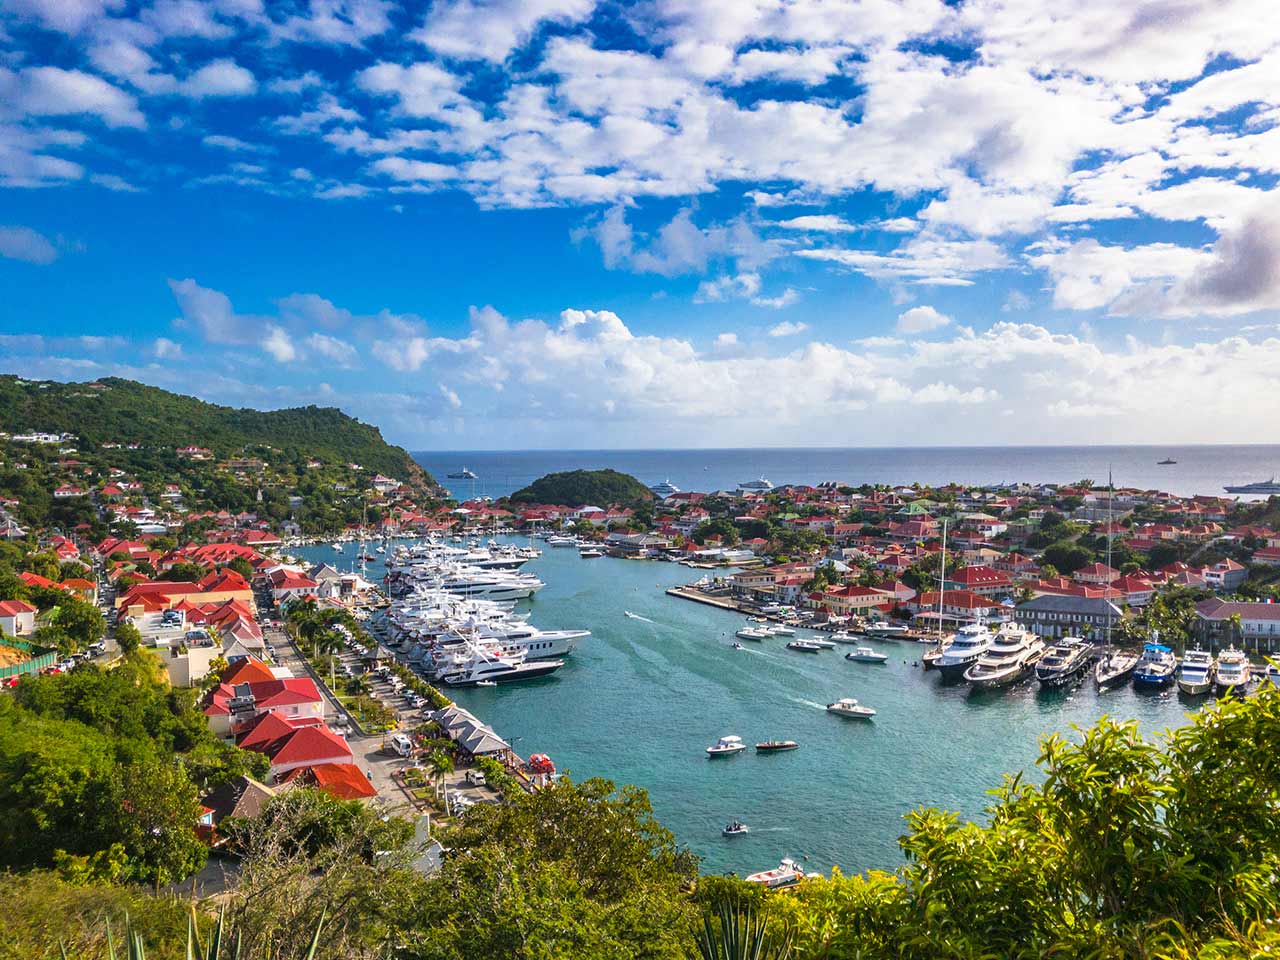 September Holidays in the Caribbean: St. Barts